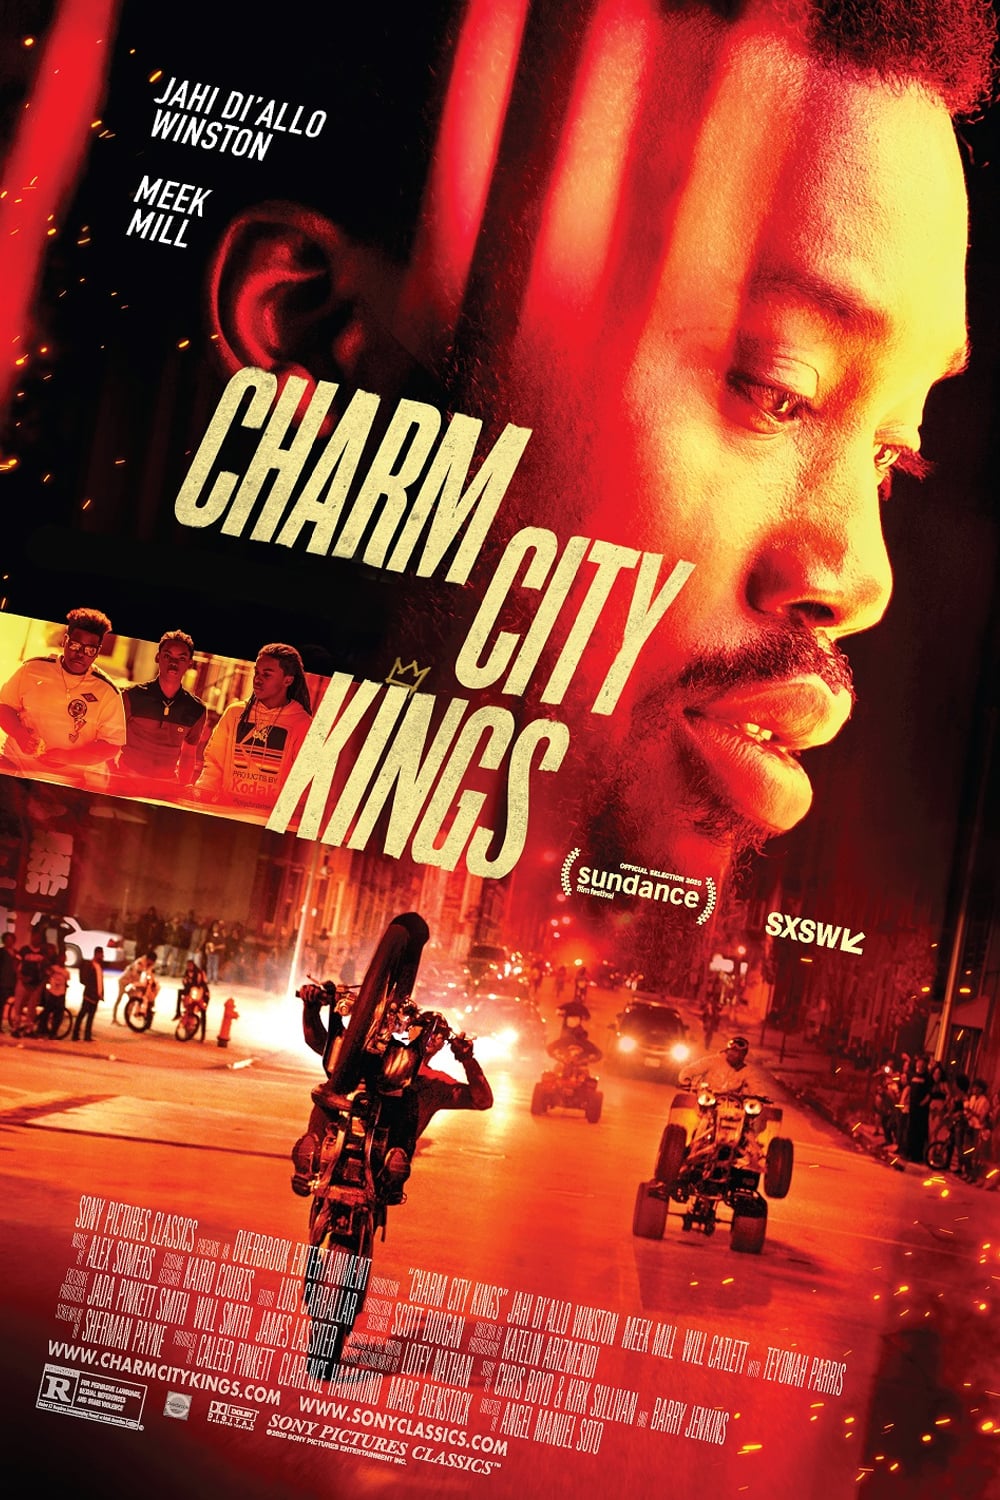 Review: 'Charm City Kings' – Punch Drunk Critics